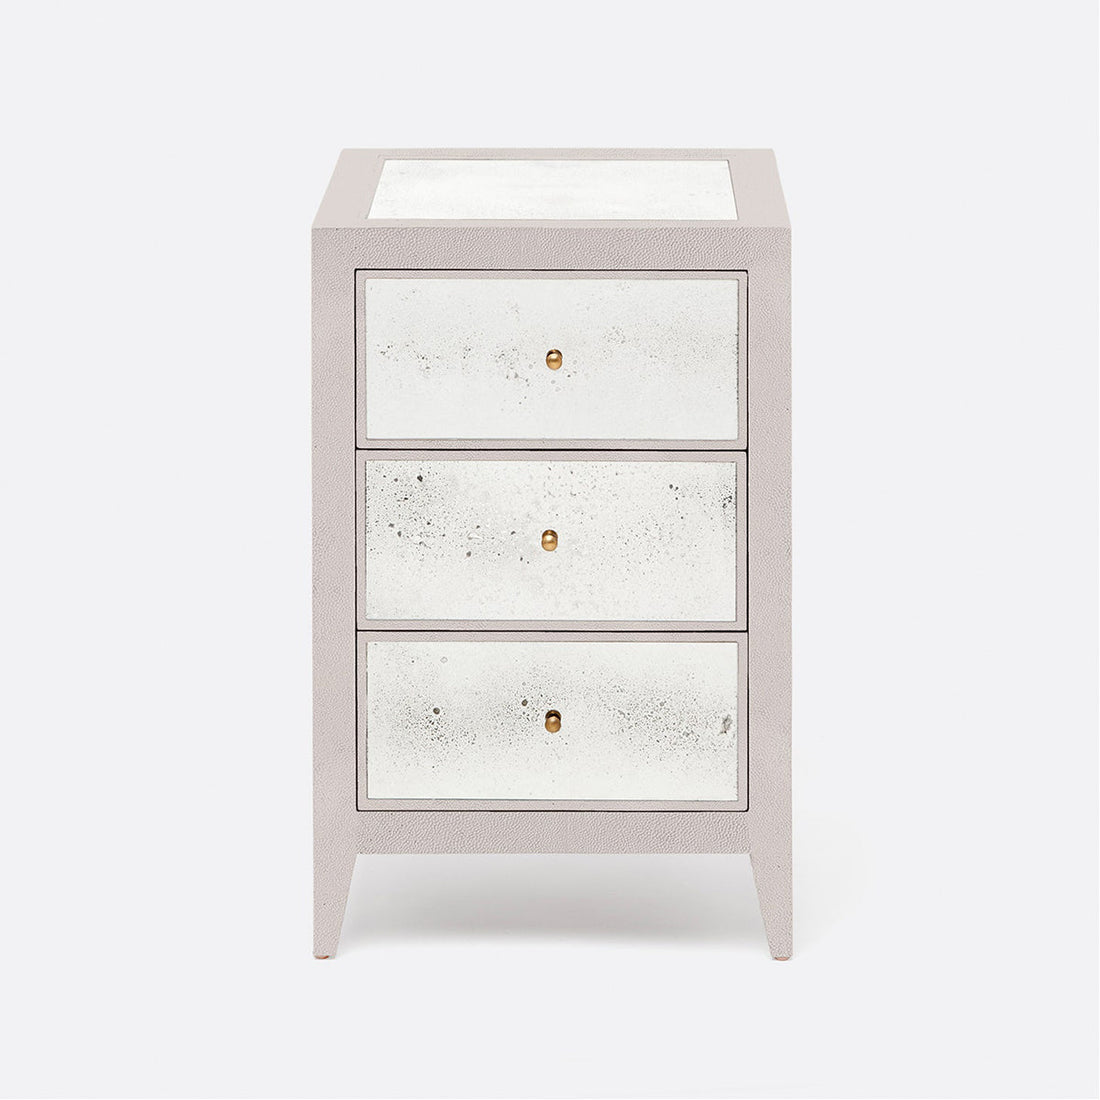 Made Goods Mia Mirrored Single Nightstand in Faux Shagreen